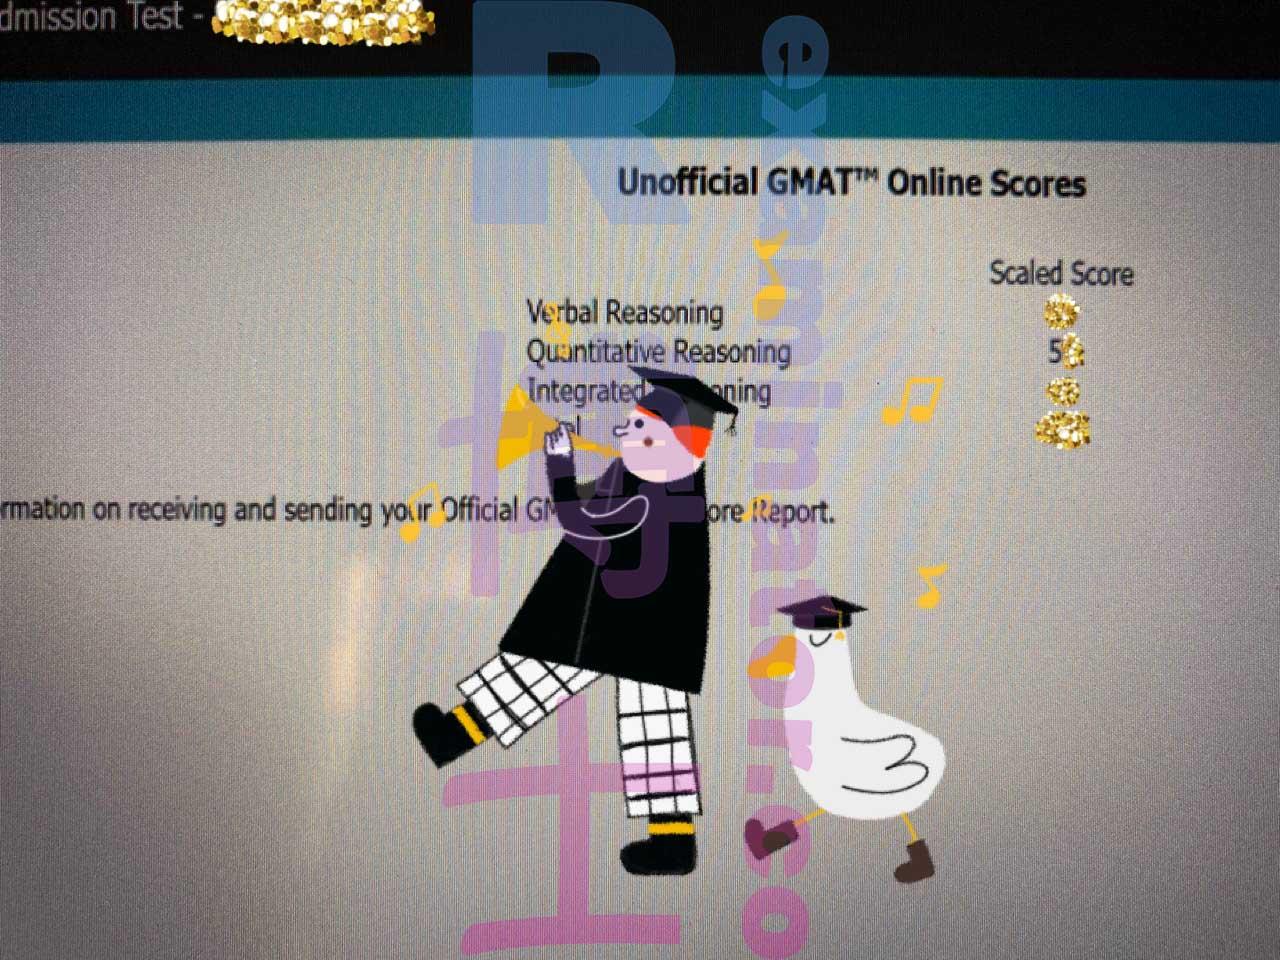 score image for GMAT Cheating success story #374